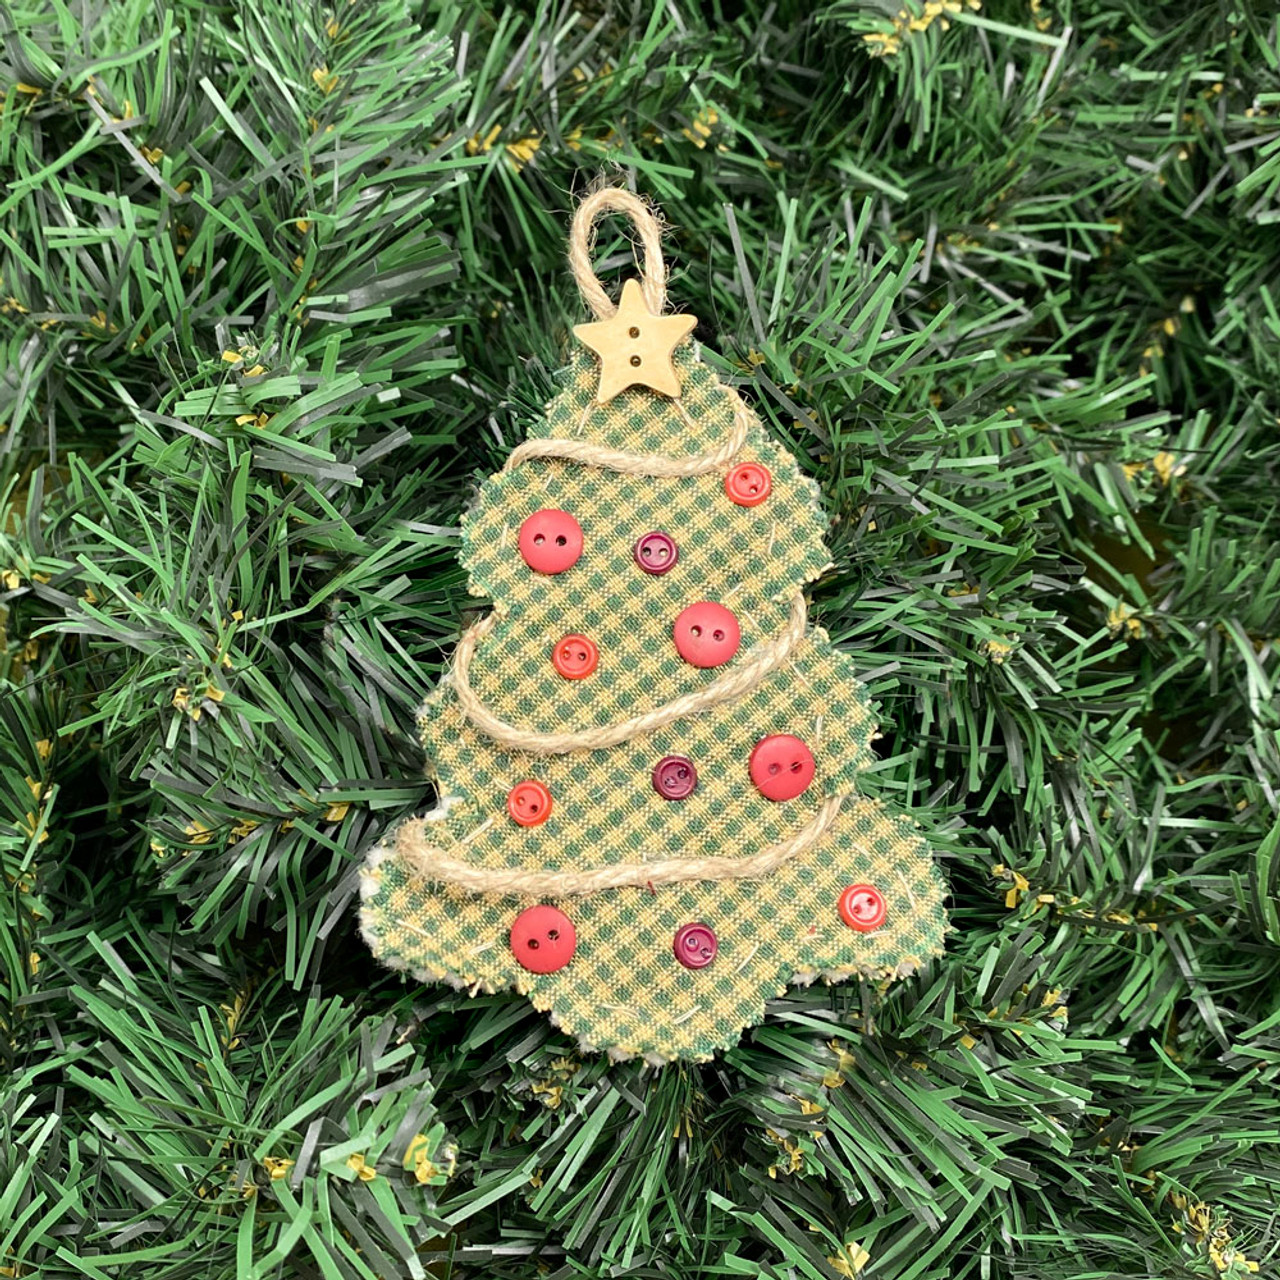 Cabin Christmas Quilted Ornaments Pattern - Printed